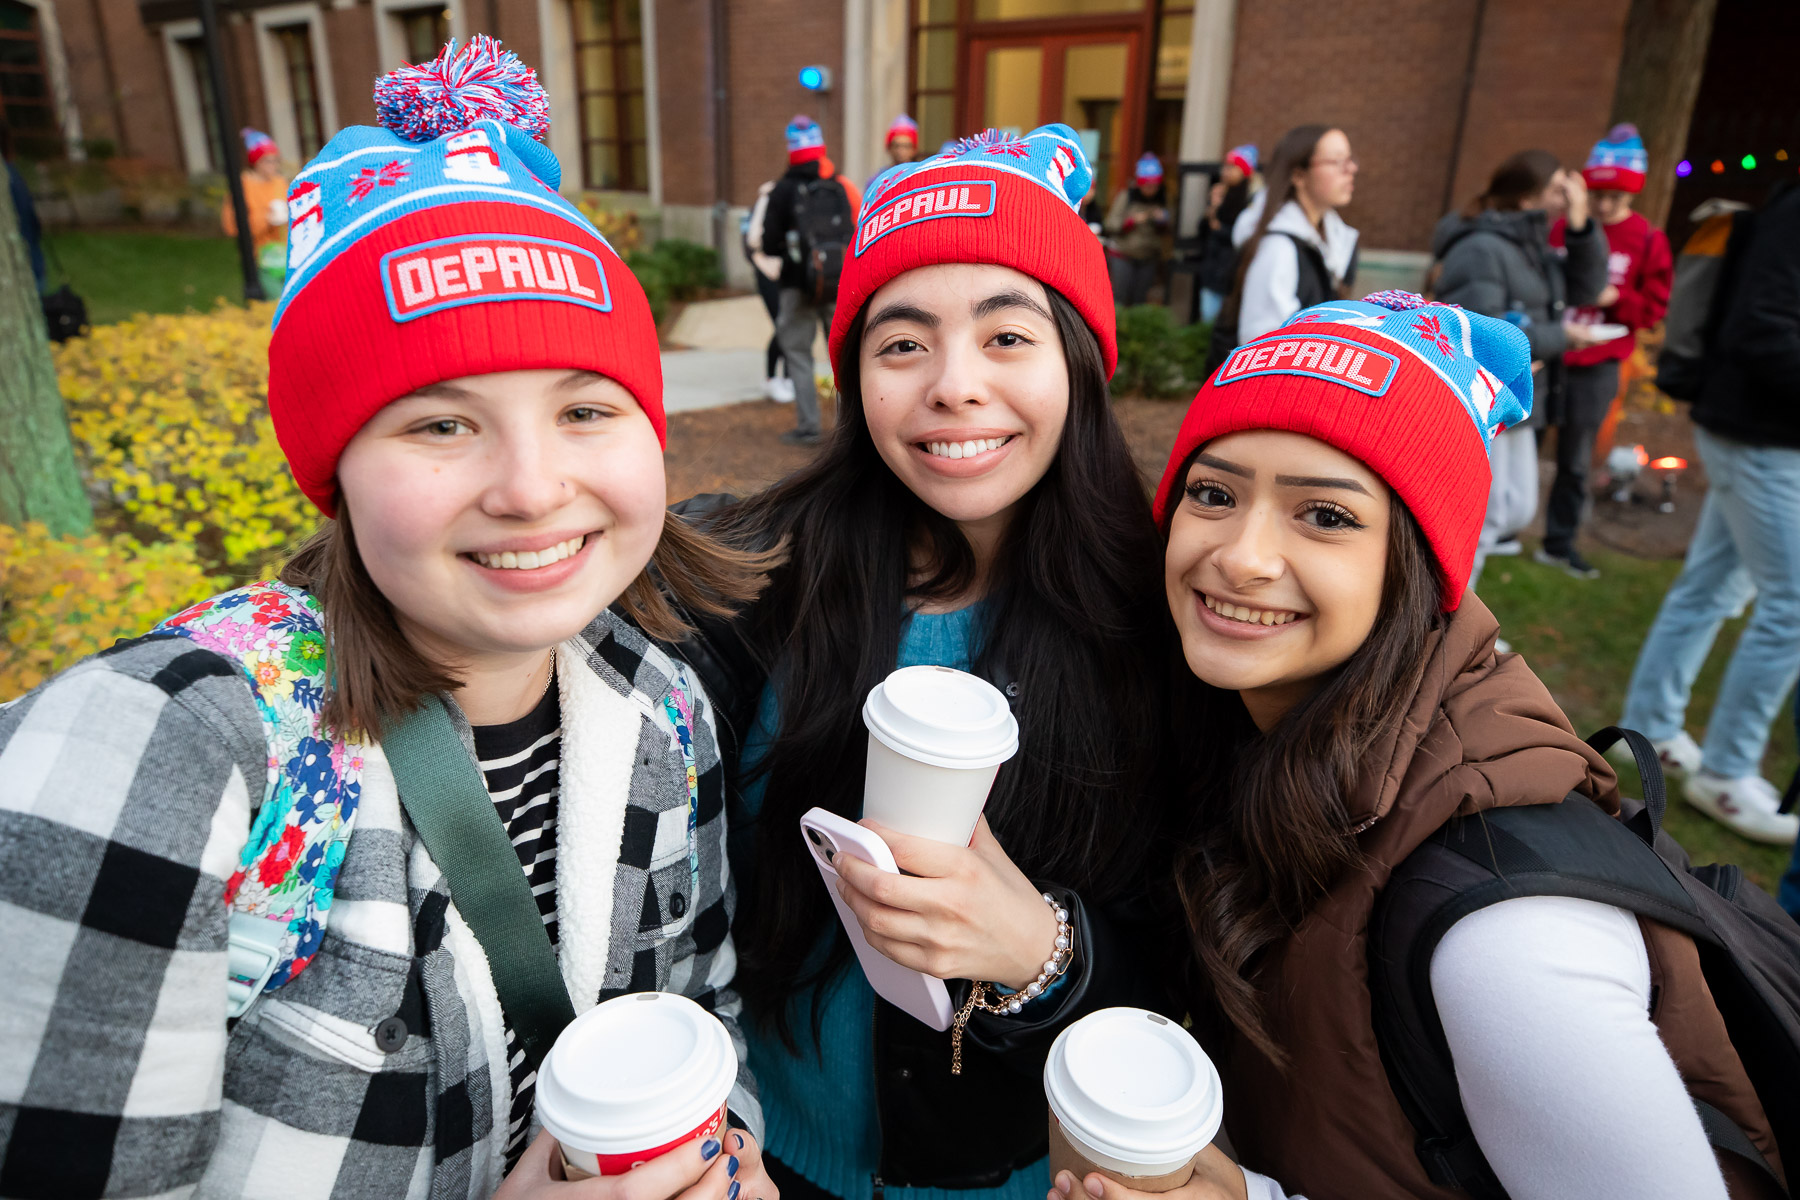 With beautiful weather, students lined up again, this time for classic DePaul winter beanies. (Photo by Jeff Carrion / DePaul University) 